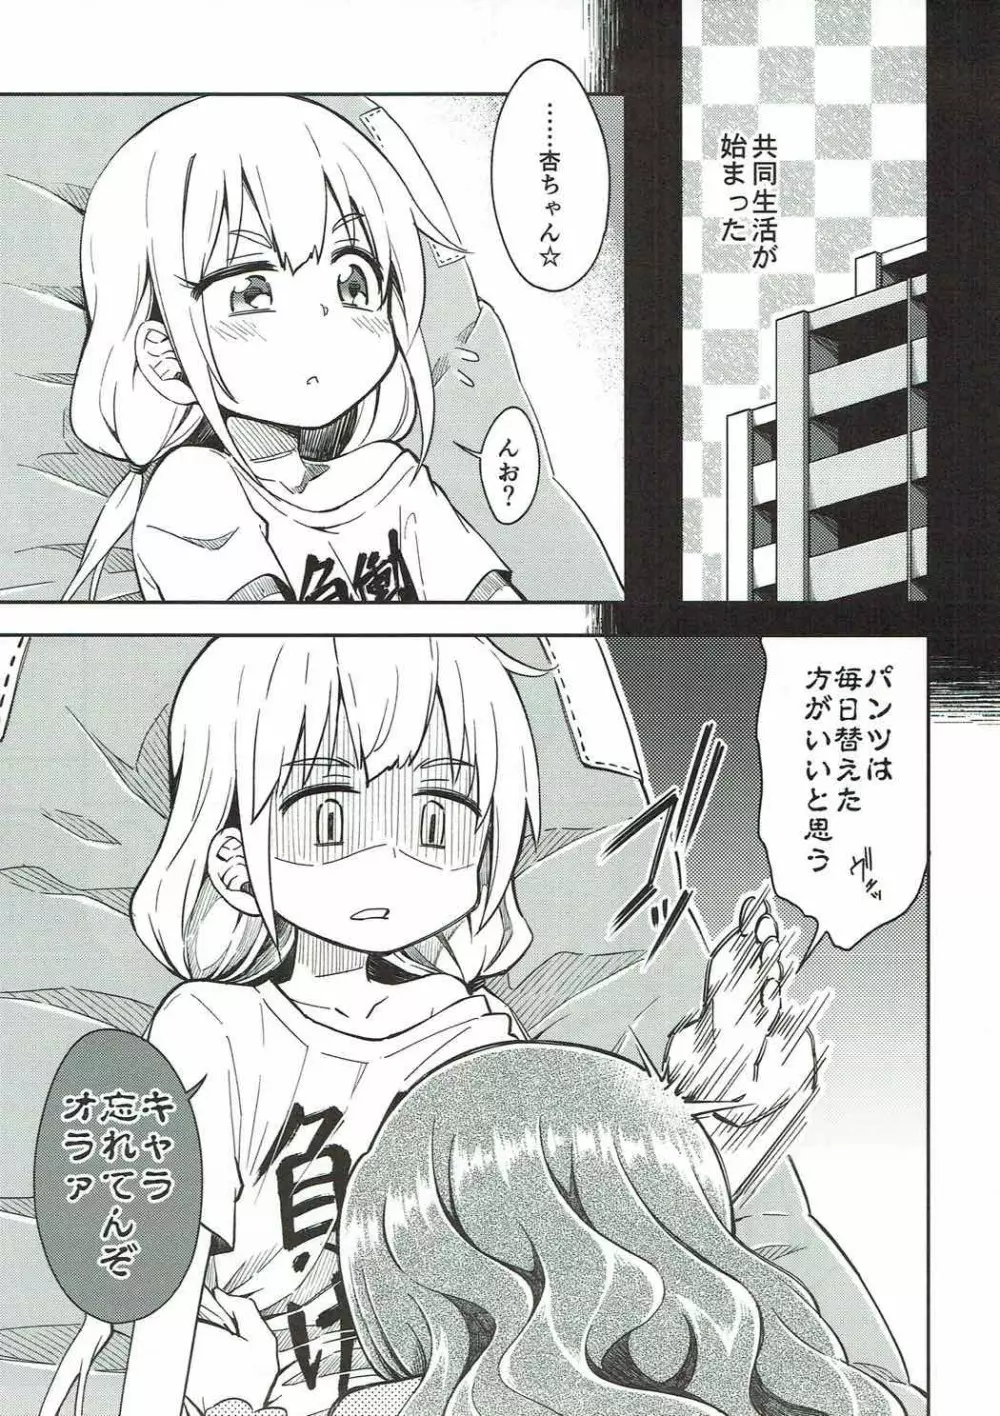 Lovely Girls' Lily vol.16 - page6